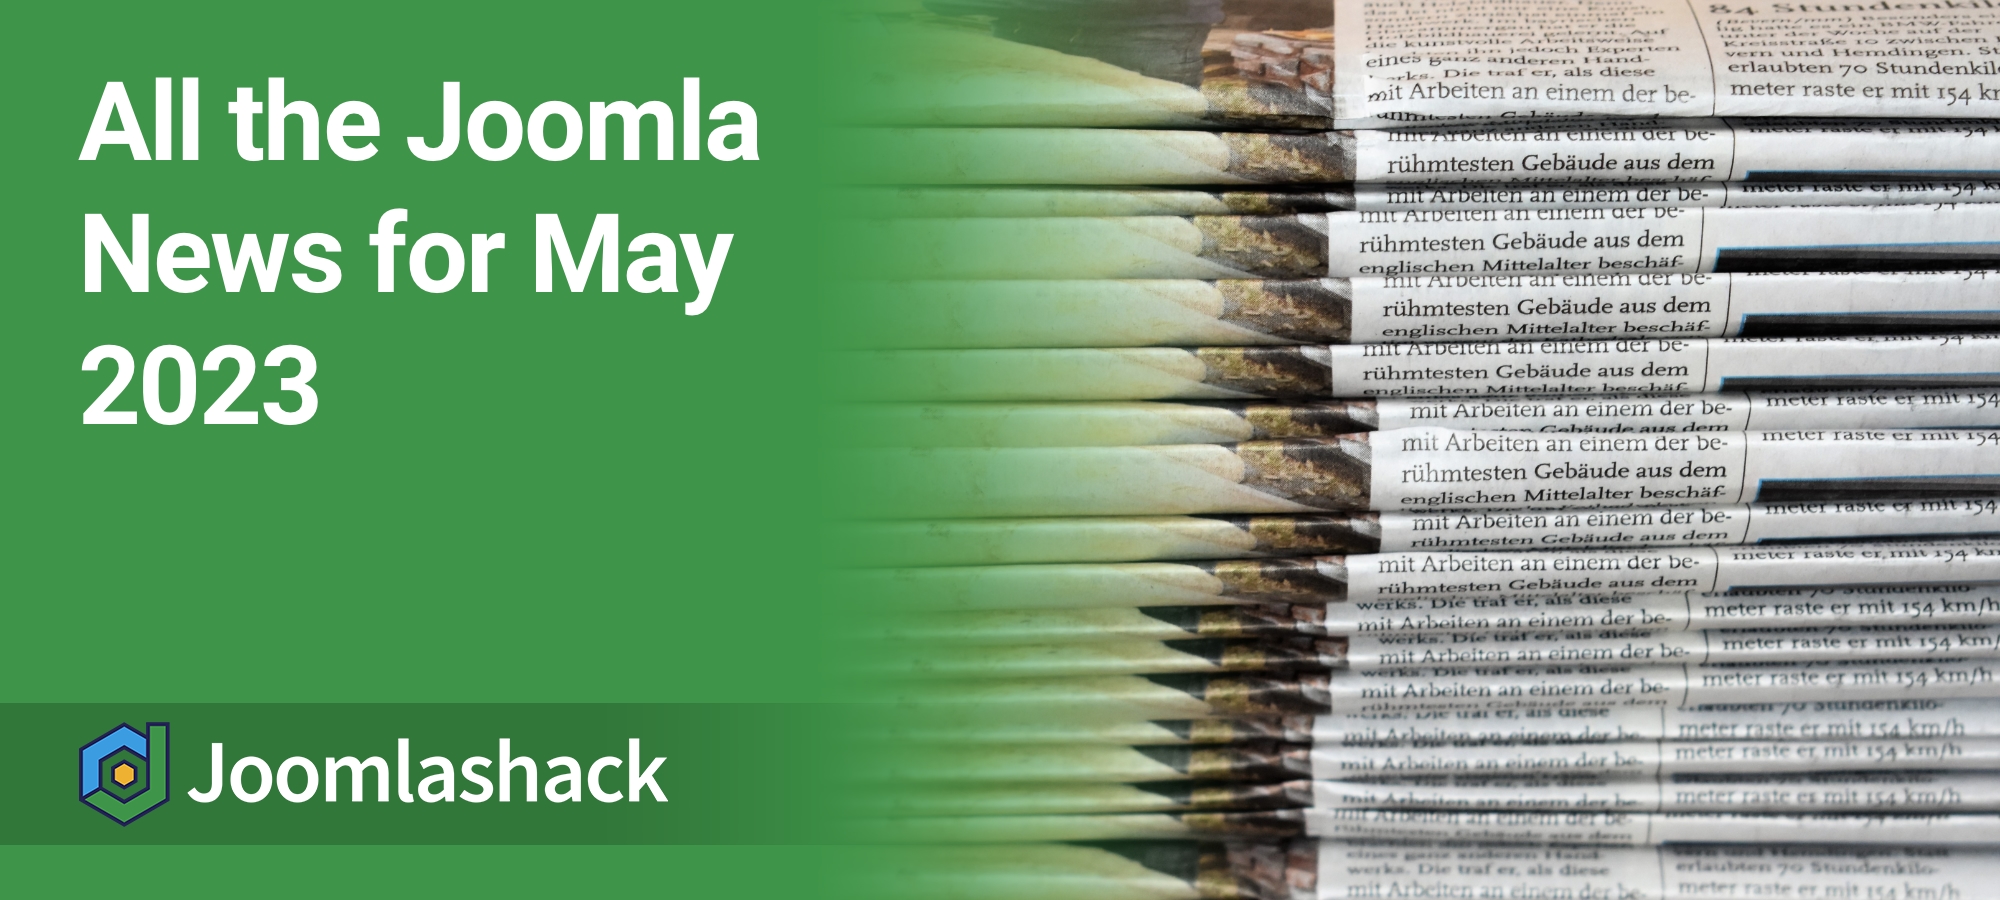 All the Joomla News for May 2023